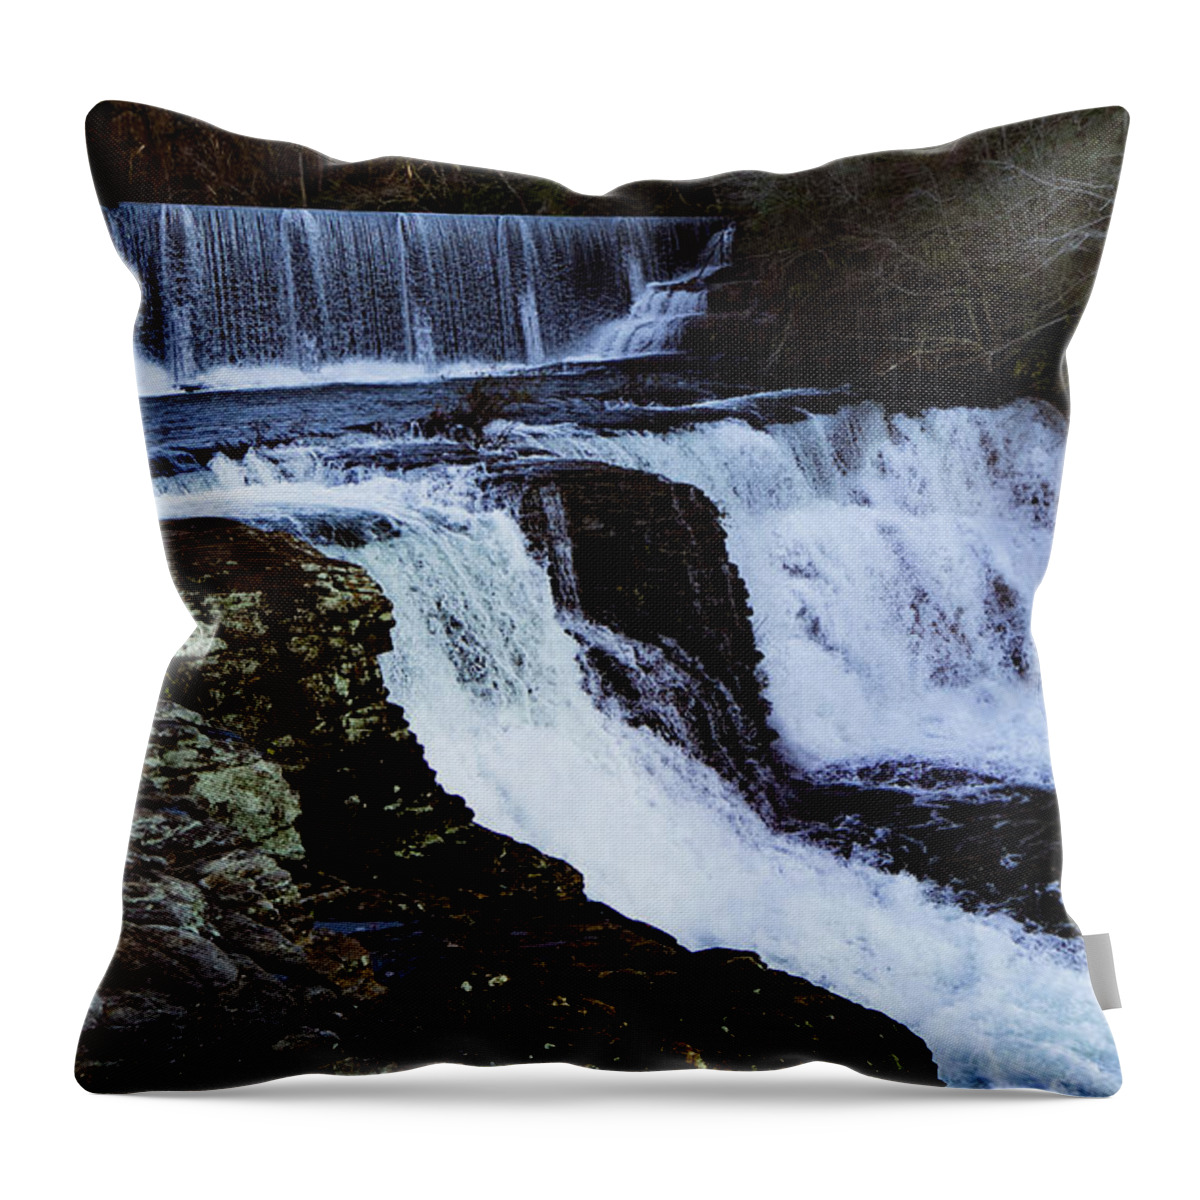 Steve Bunch Throw Pillow featuring the photograph Afternoon at De Soto Falls by Steve Bunch